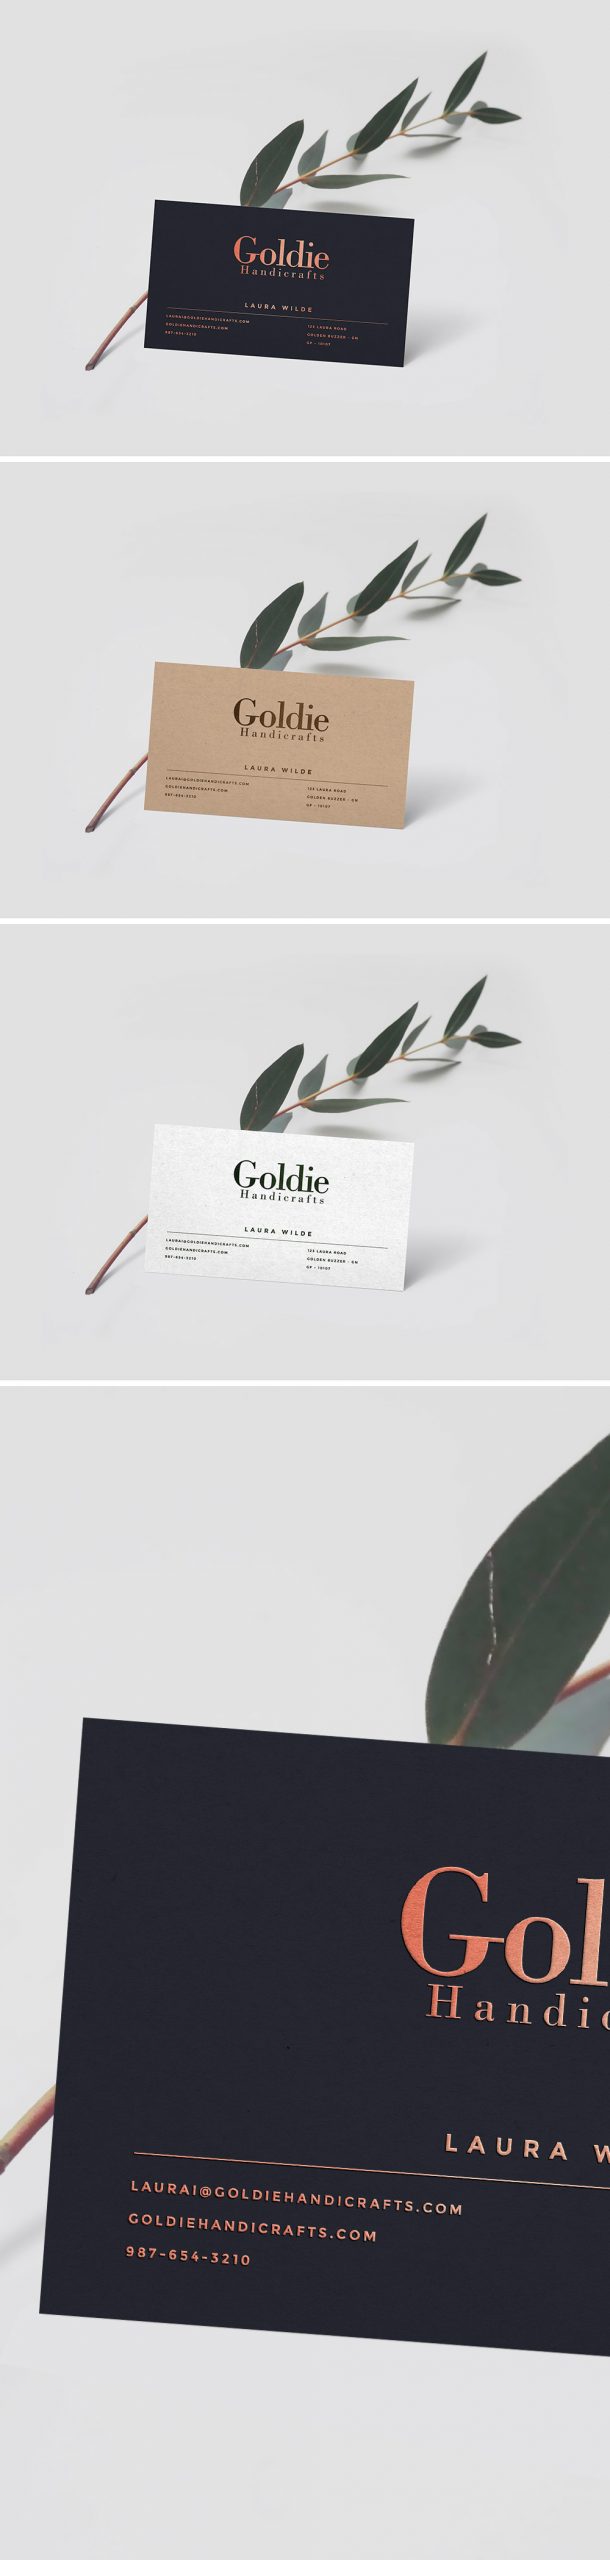 Realistic Business Card Mockup PSD with Leaf Free Download